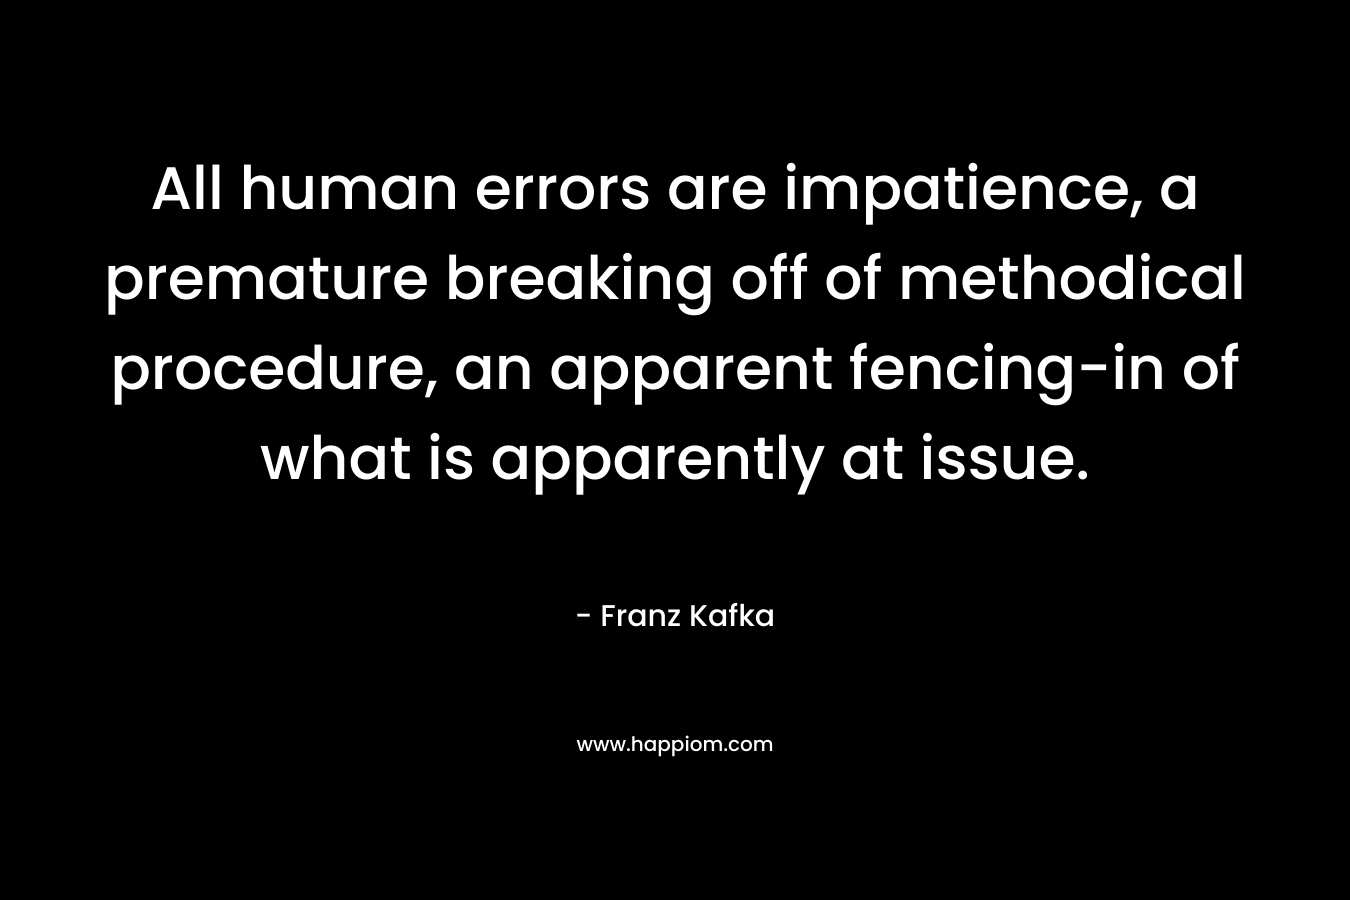 All human errors are impatience, a premature breaking off of methodical procedure, an apparent fencing-in of what is apparently at issue. – Franz Kafka